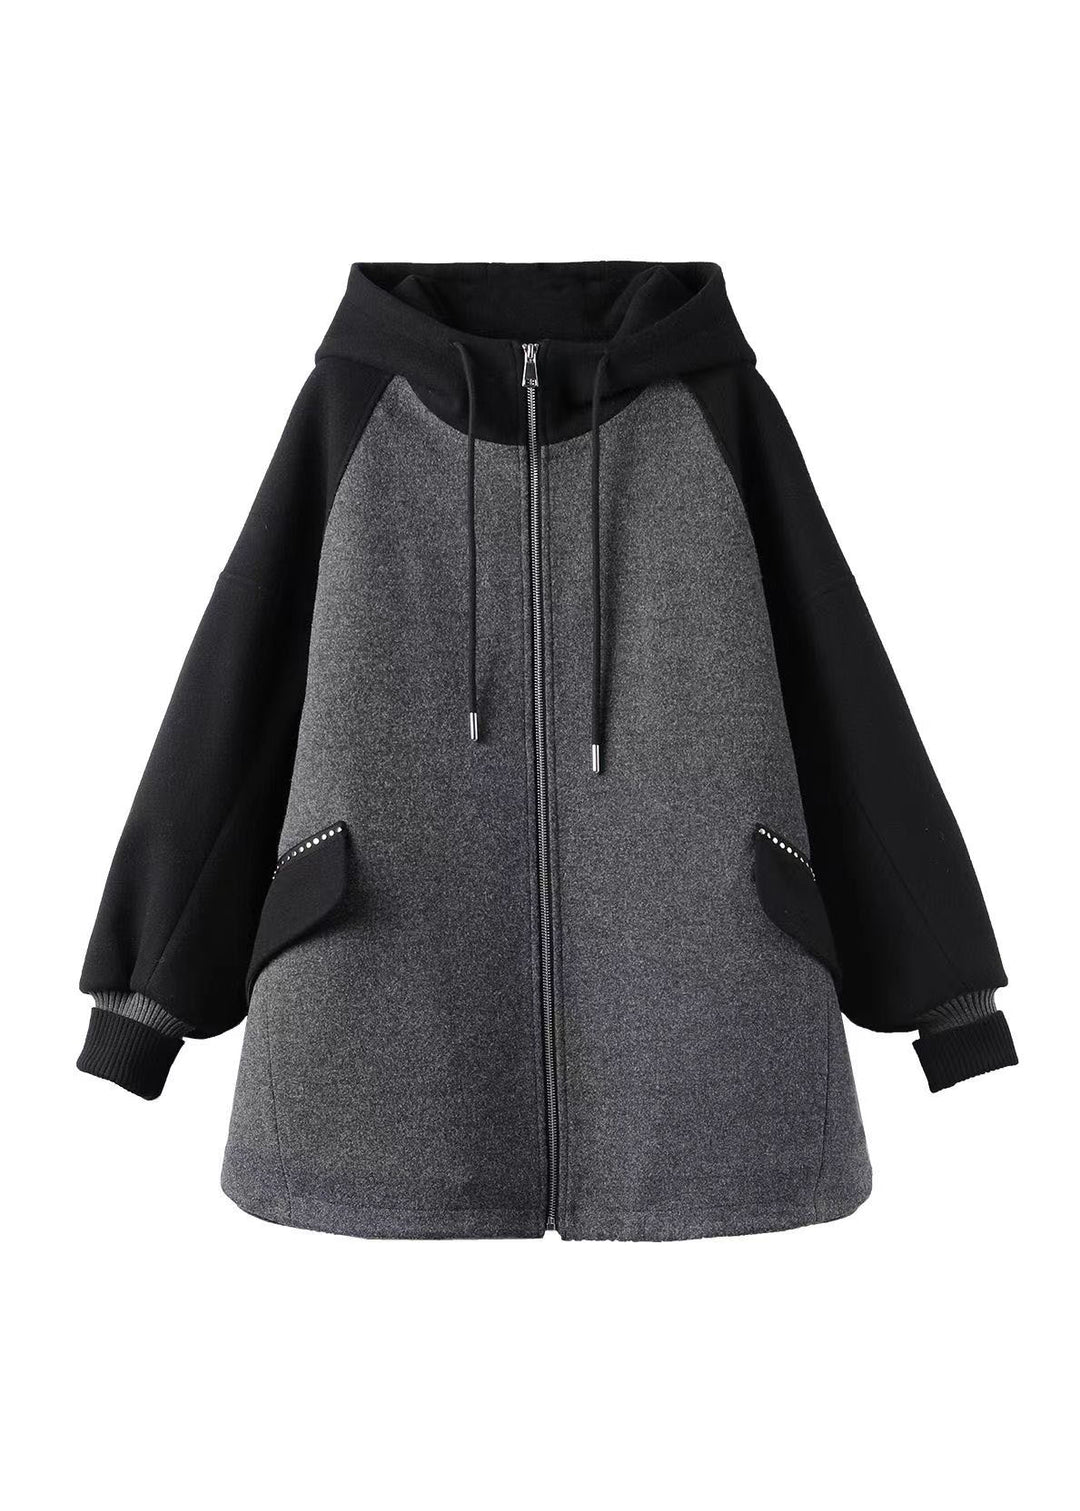 Plus Size Grey Zip Up Pockets Patchwork Fine Cotton Filled Hooded Coat Fall